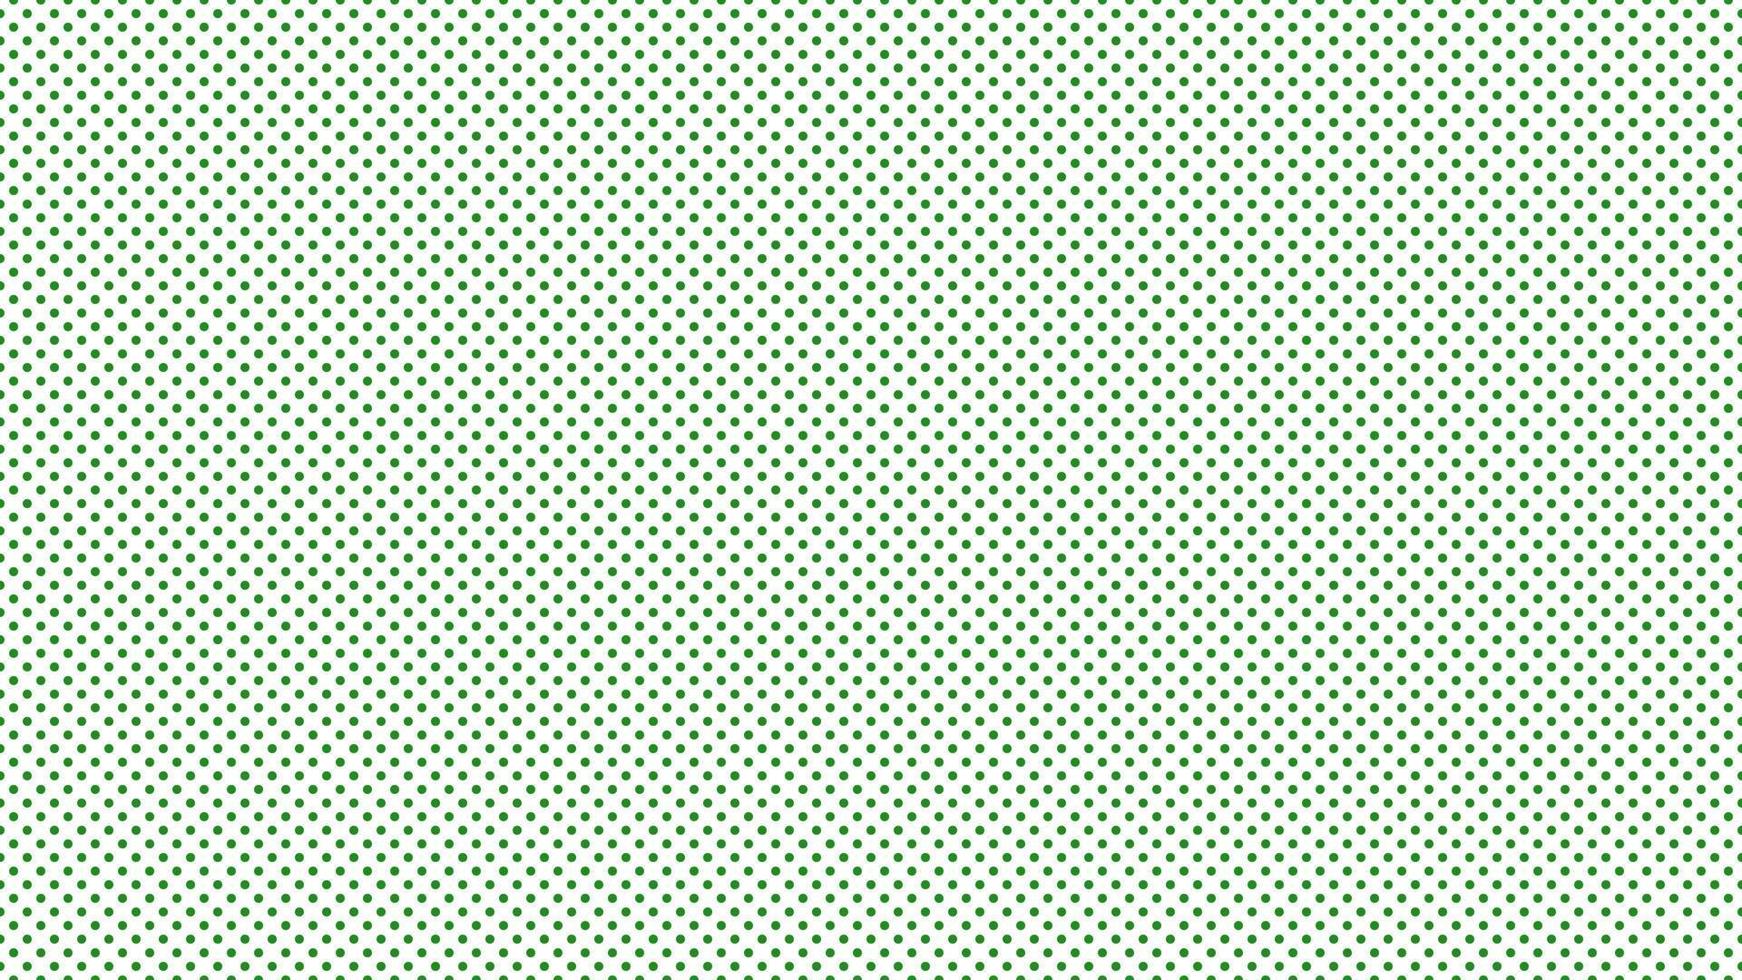 forest green color polka dots background vector